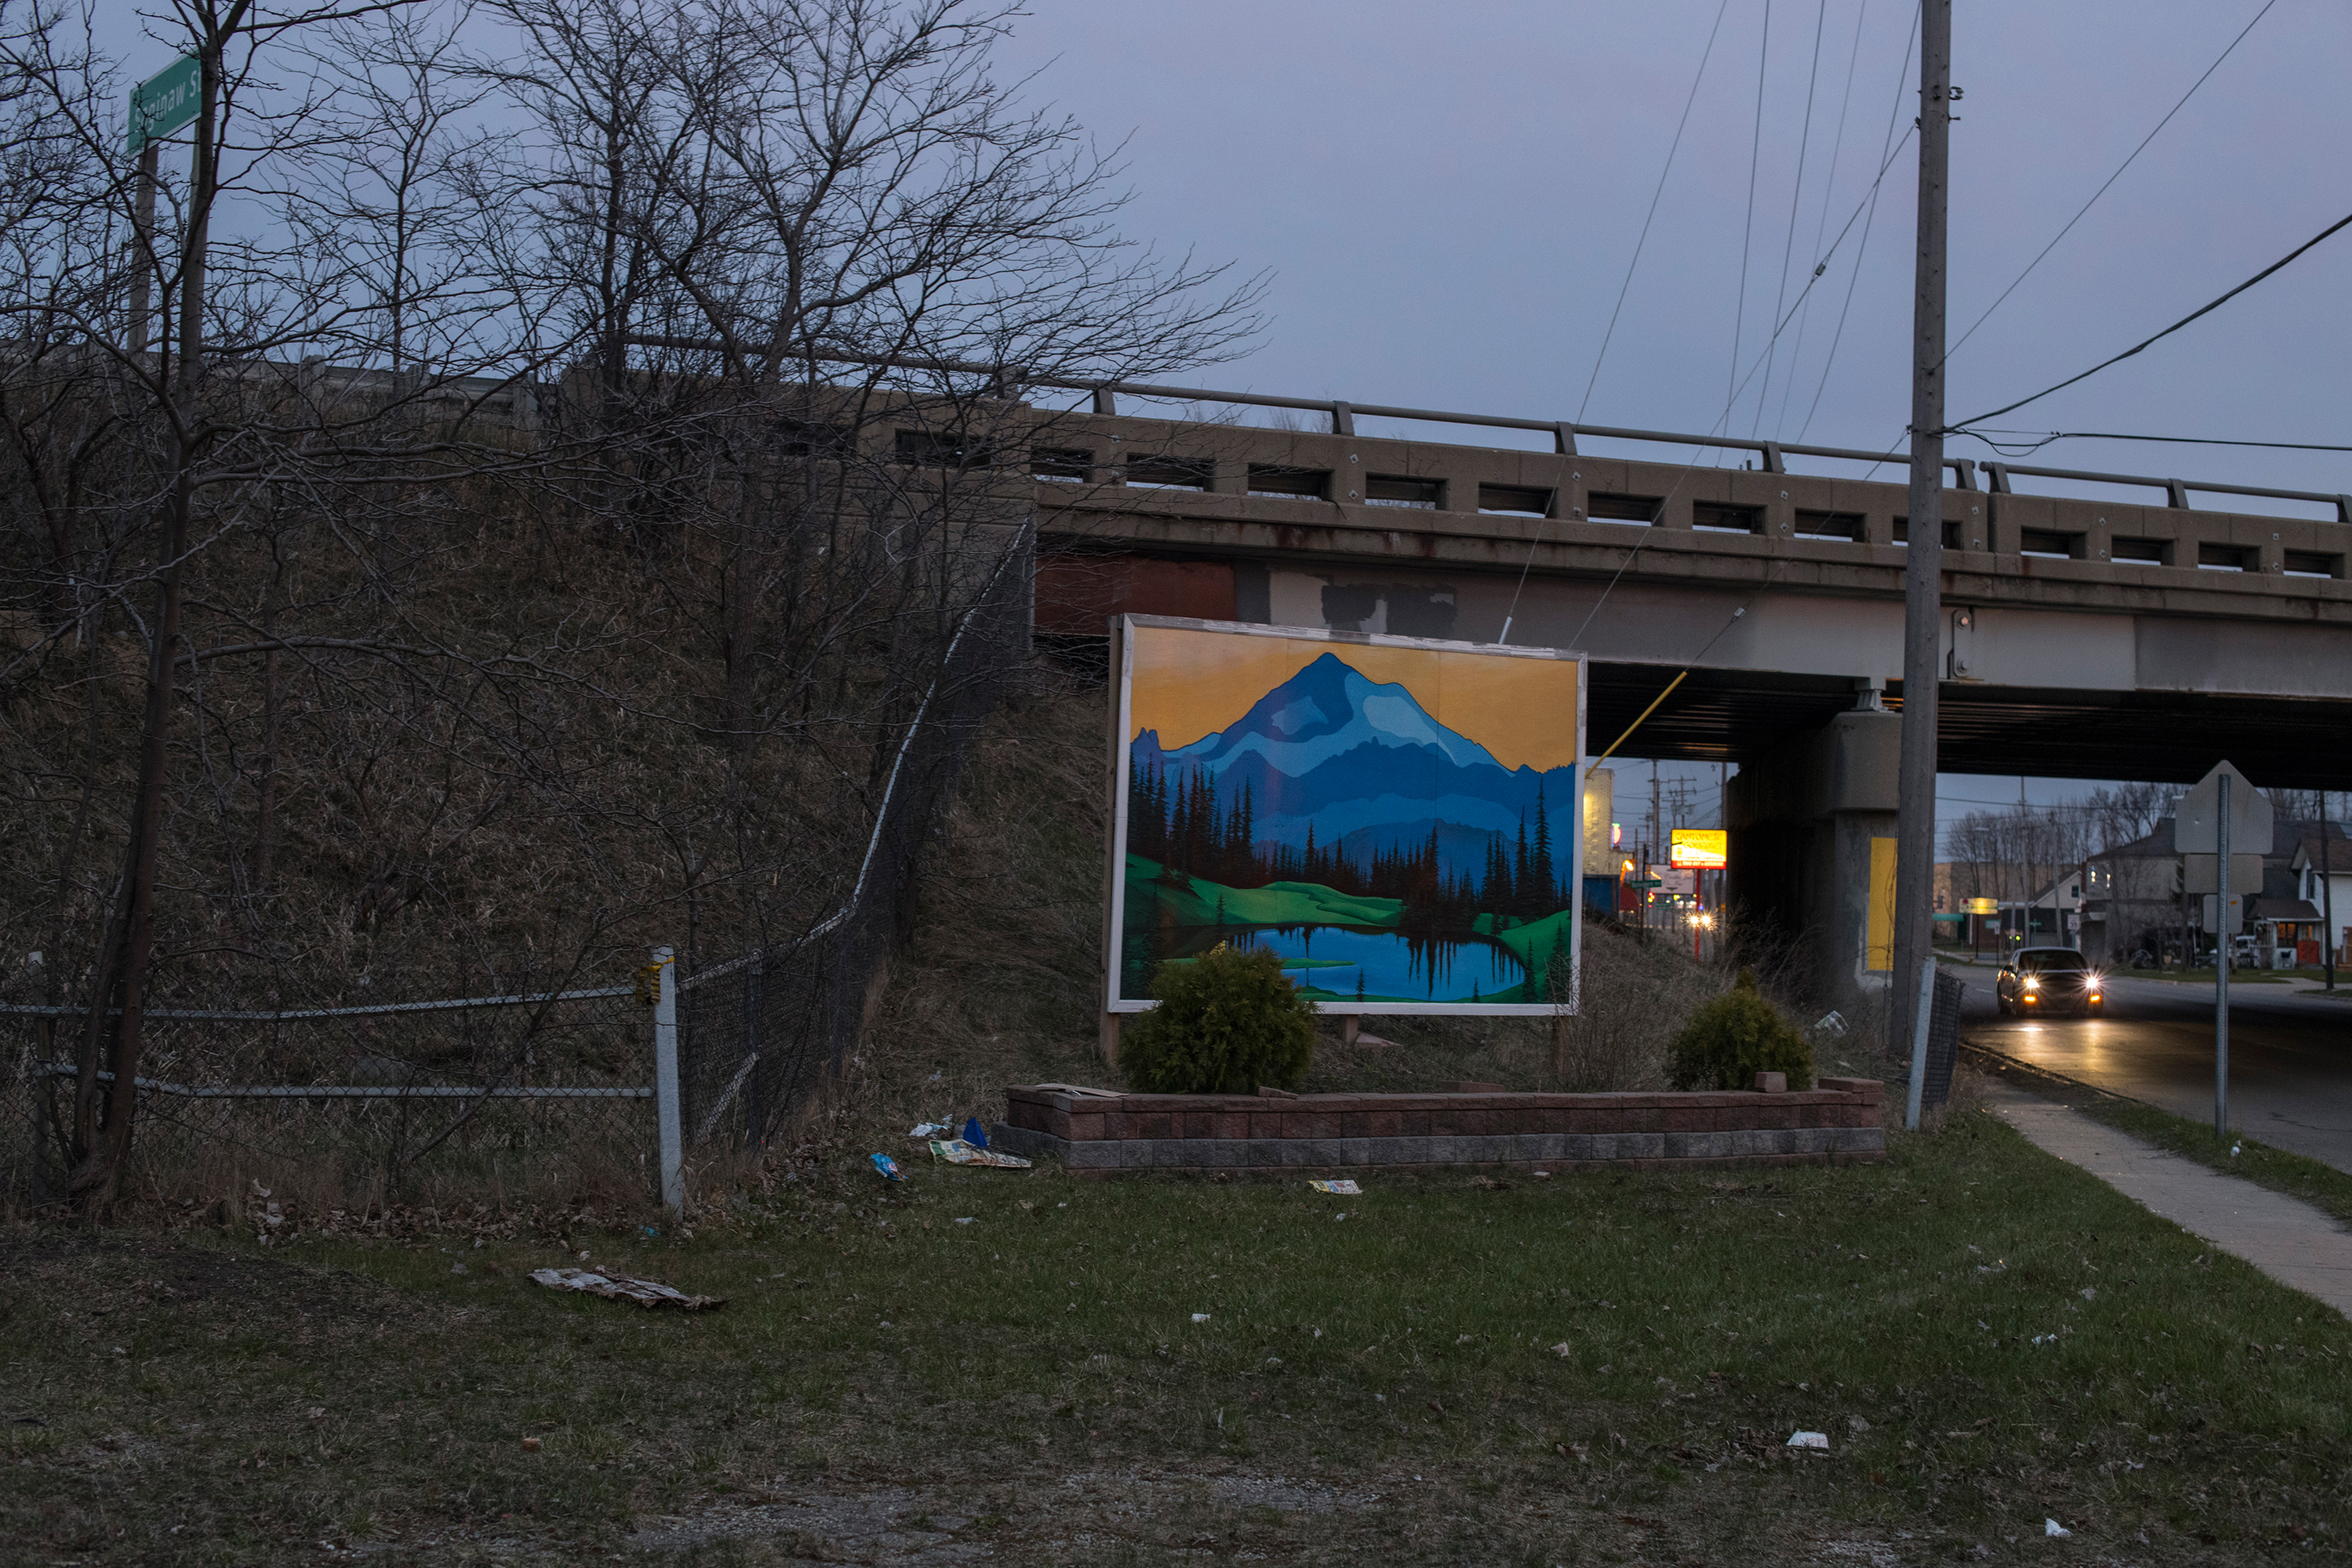 A picturesque mural sits on the side of Saginaw Street on the south side of Flint. (Brittany Greeson for TIME)